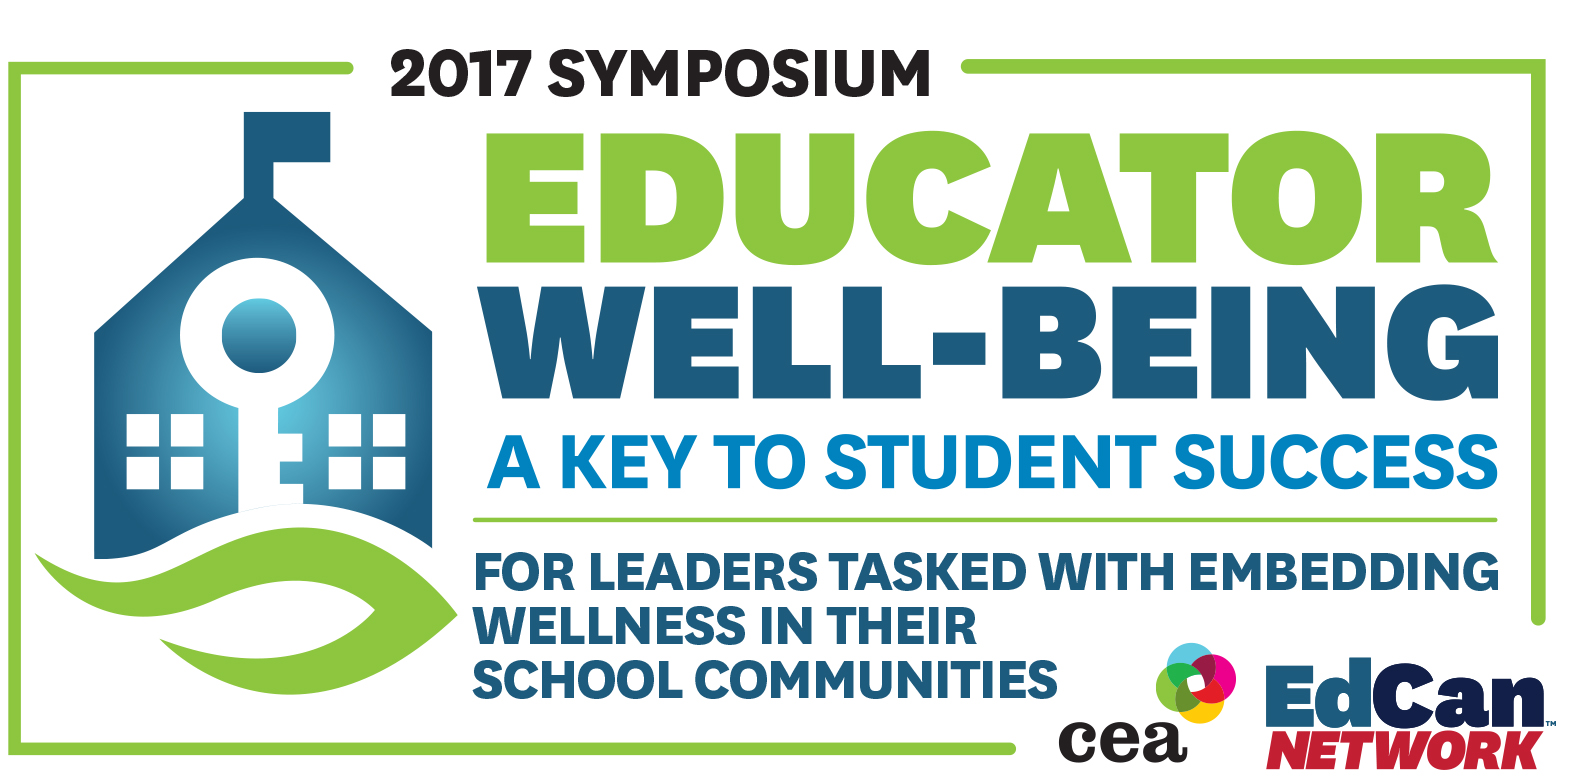 Education leaders from across Canada gathered in Toronto for the Educator Well-Being: A Key to Student Success symposium from October 5-6, 2017 to discuss how they can create a climate that supports well-being for all.